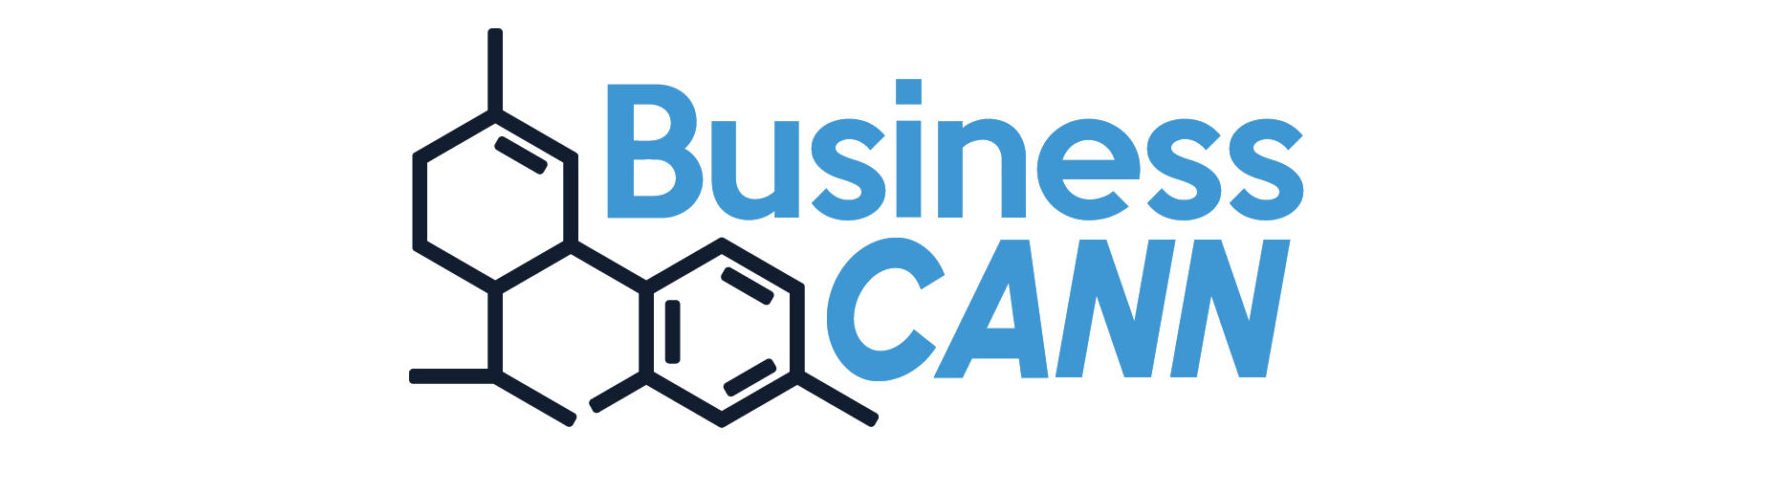 Business Cann Logo Feature Image Scaled